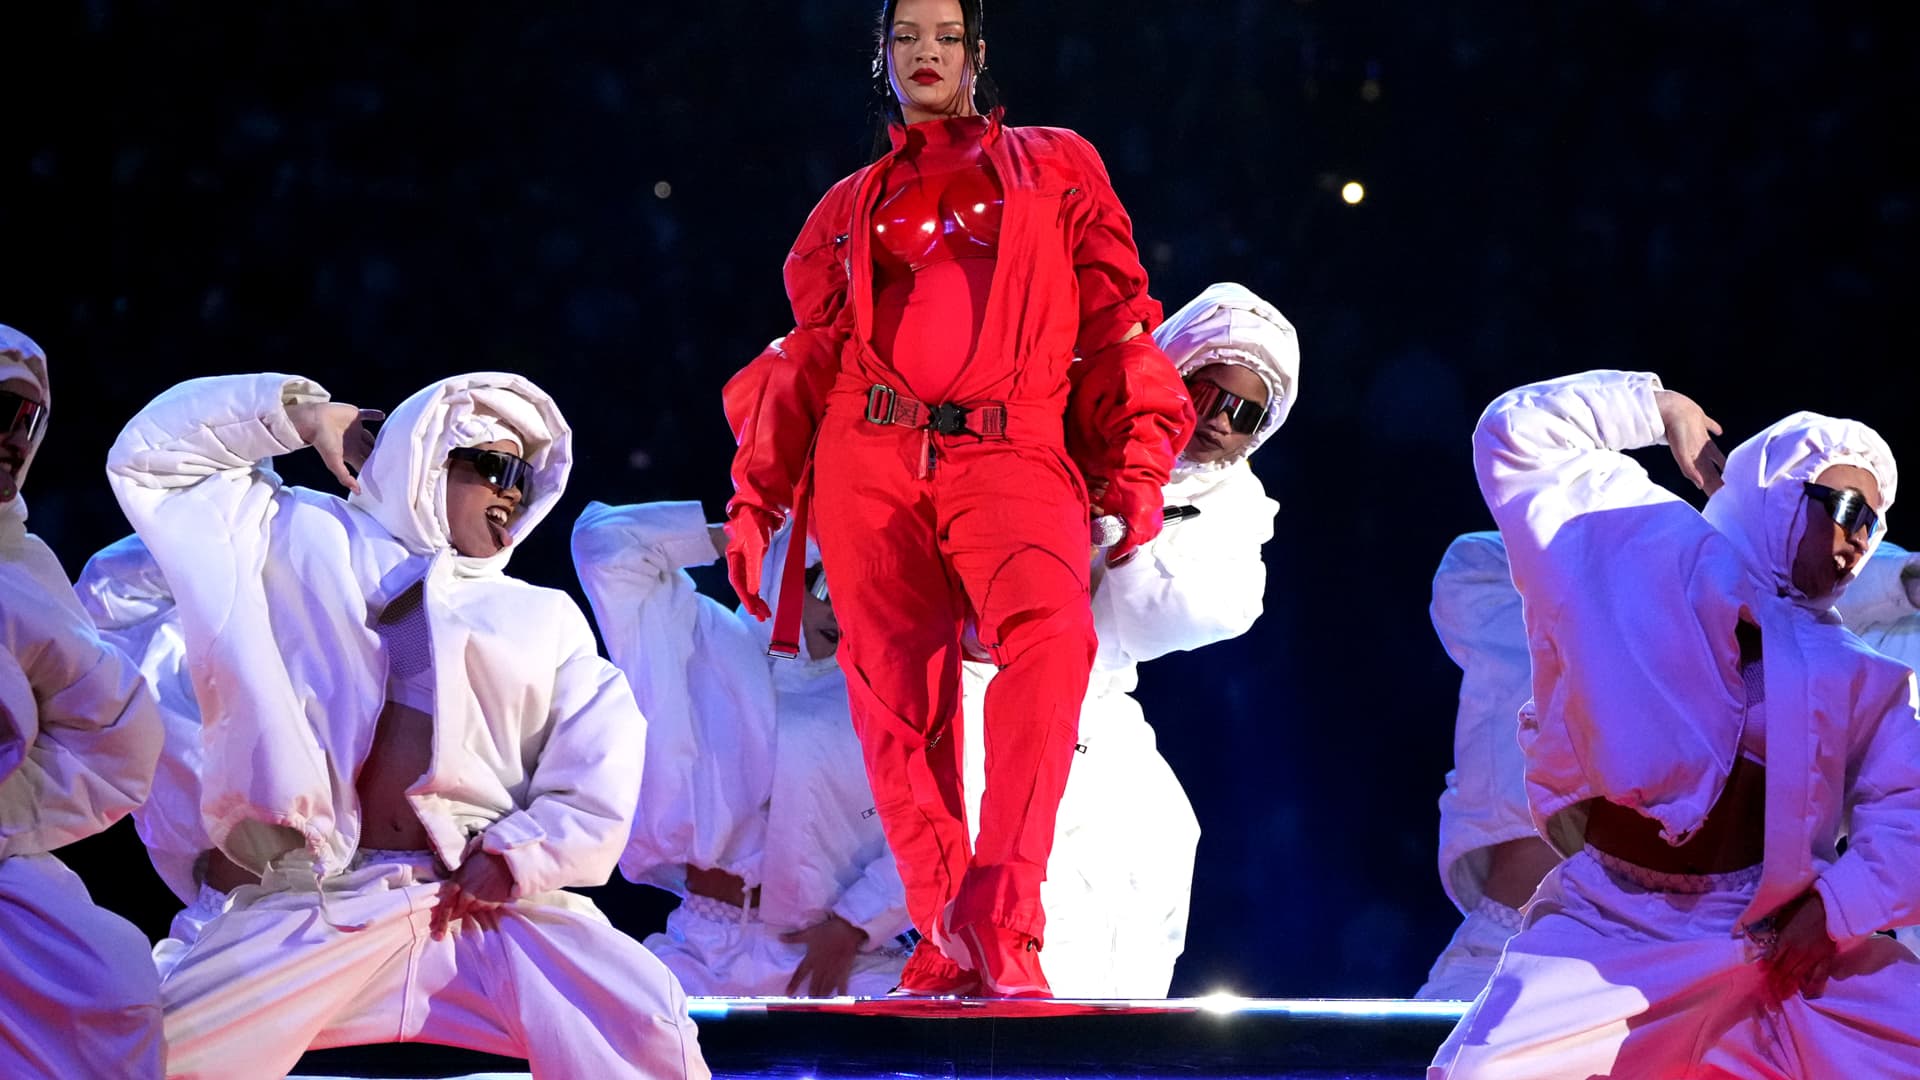 Rihanna used her Super Bowl performance to announce she's pregnant with her second child.